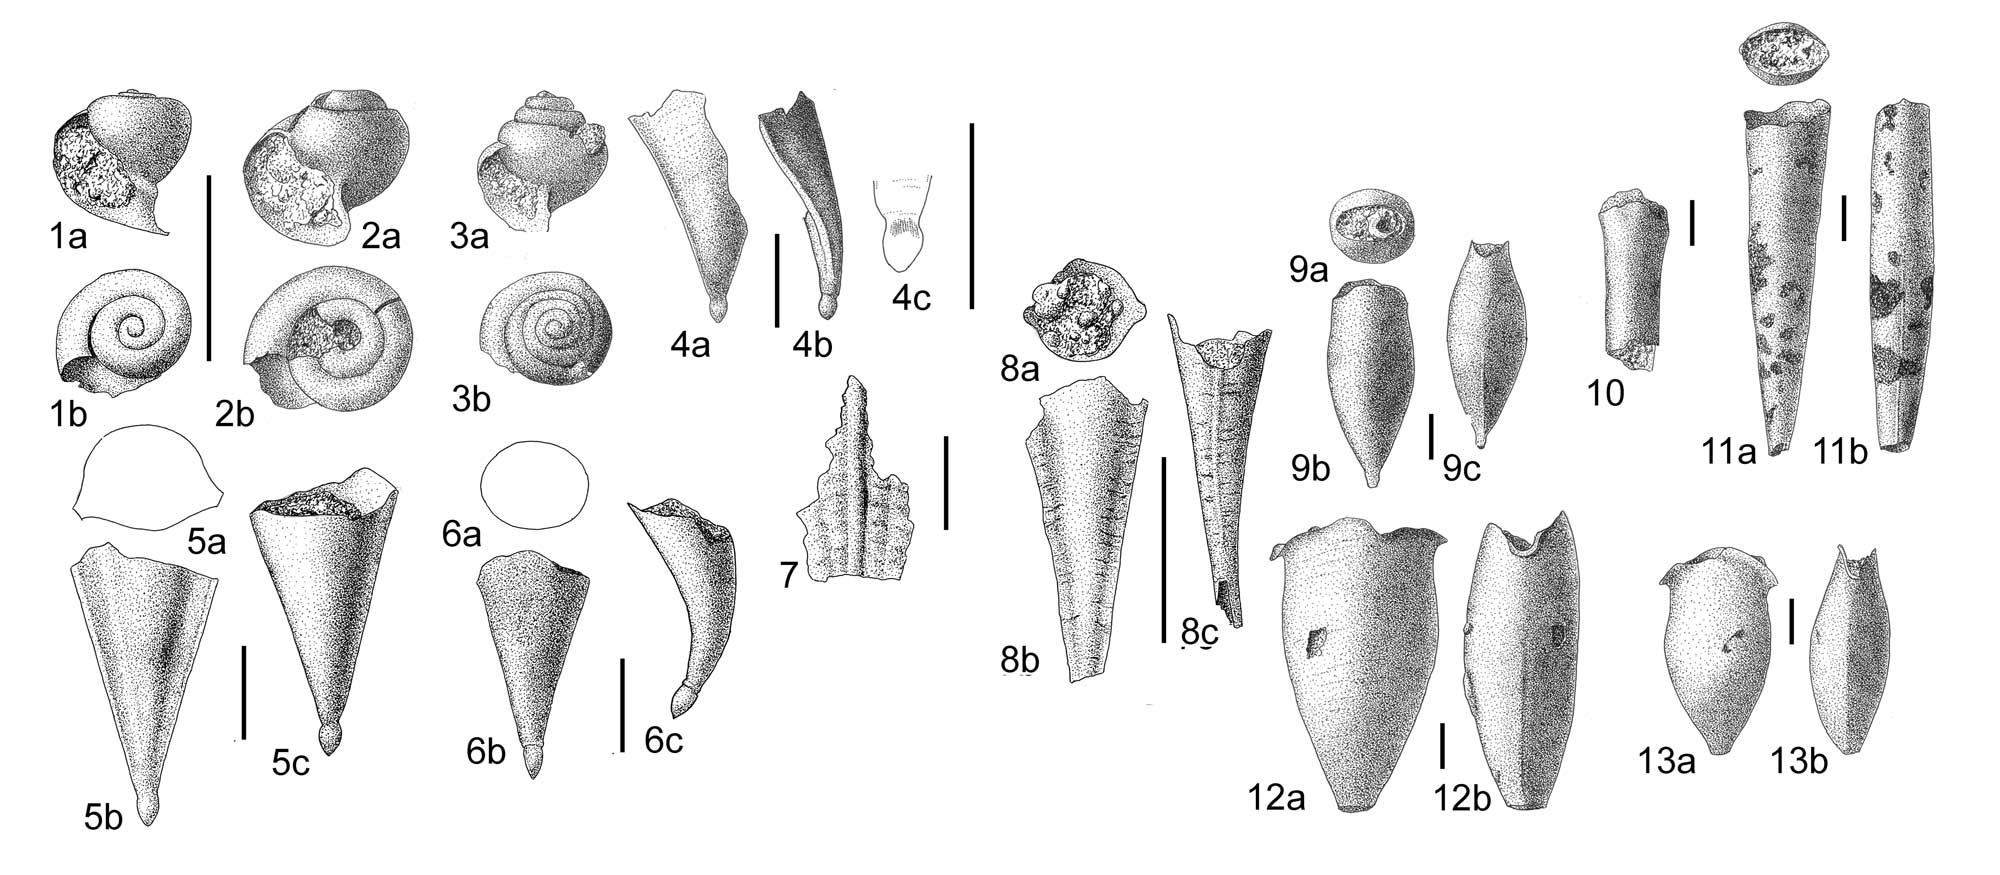 Image showing drawings of a diversity of pteropod fossils from the Miocene of Venezuela.